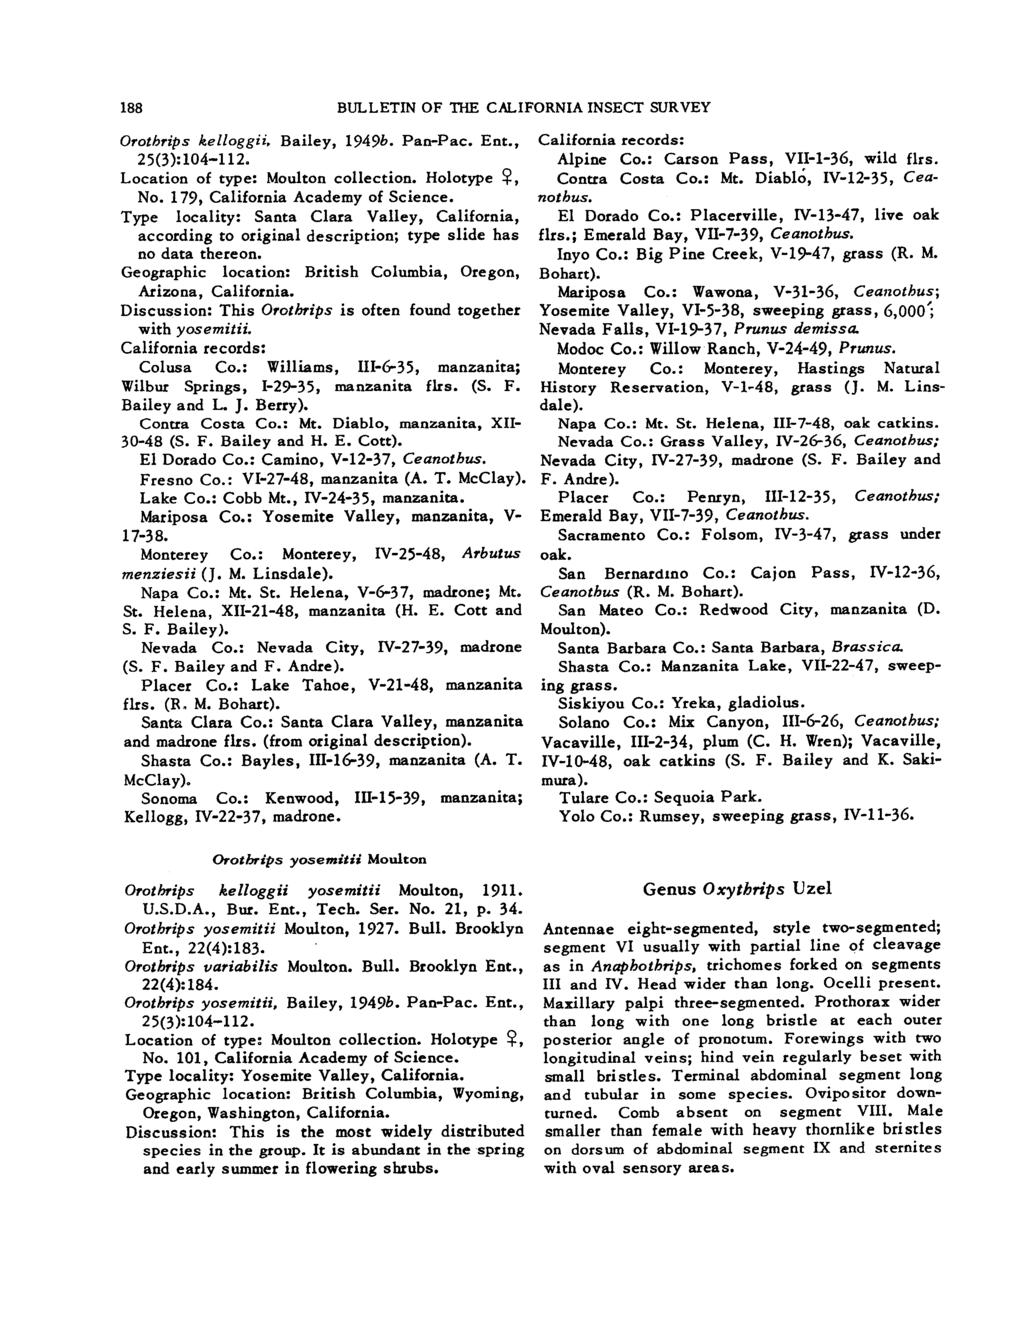 188 BULLETIN OF THE CALIFORNIA INSECT SURVEY Orothrips kelloggii, Bailey, 1949b. Pan-Pac. Ent., 25(3):104-112. Location of type: Modton collection. Holotype 9, No. 179, California Academy of Science.